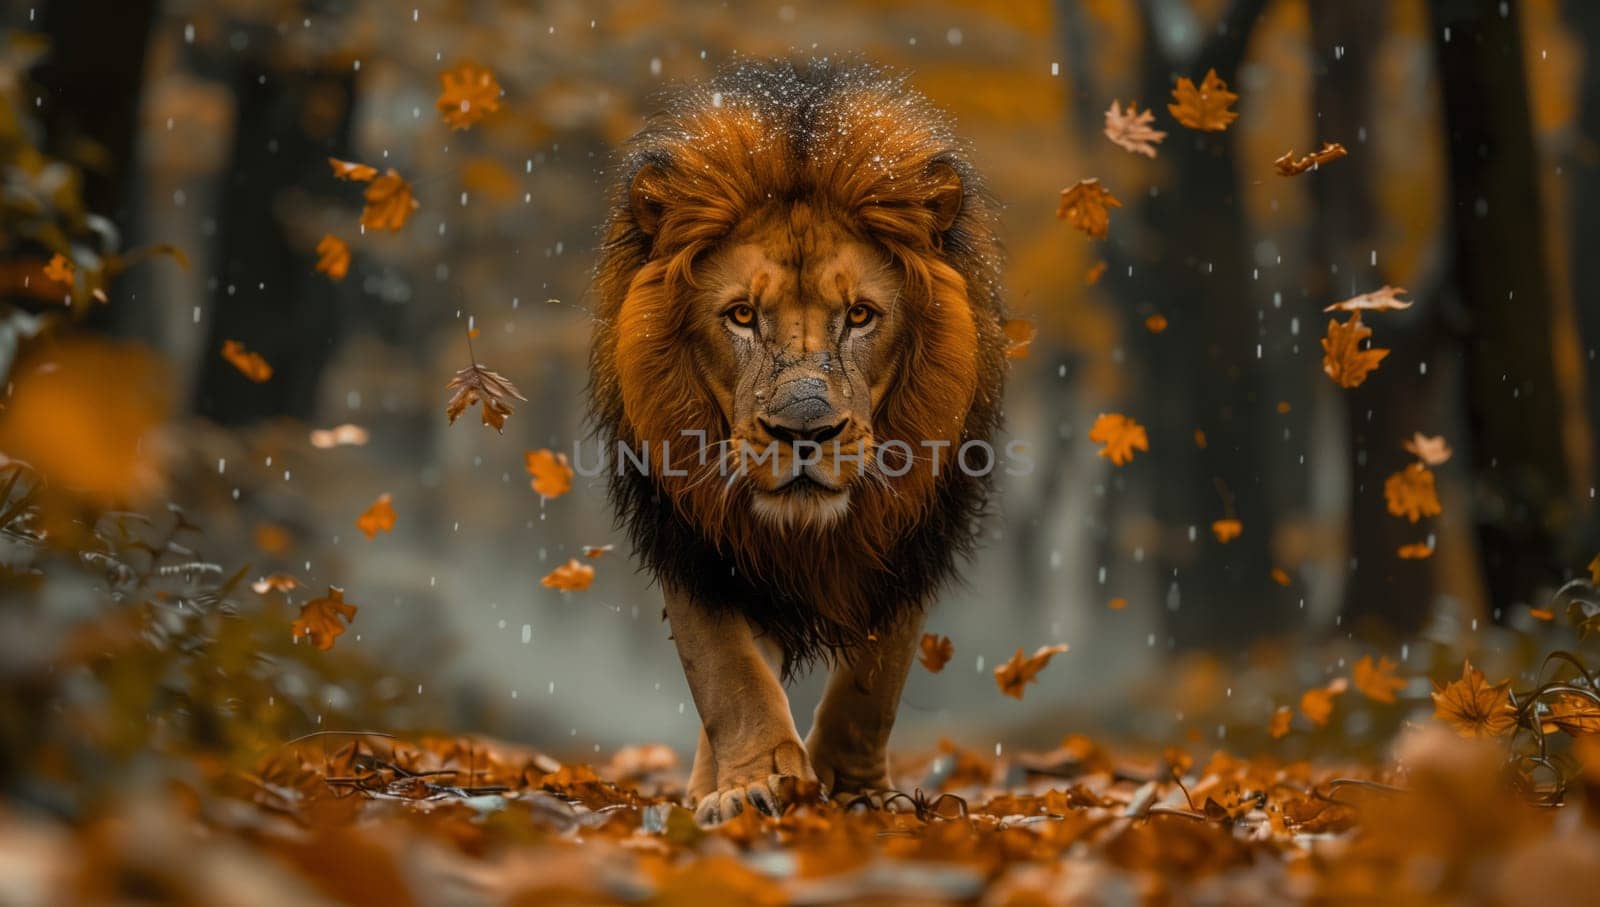 a lion is walking through a forest surrounded by leaves by richwolf